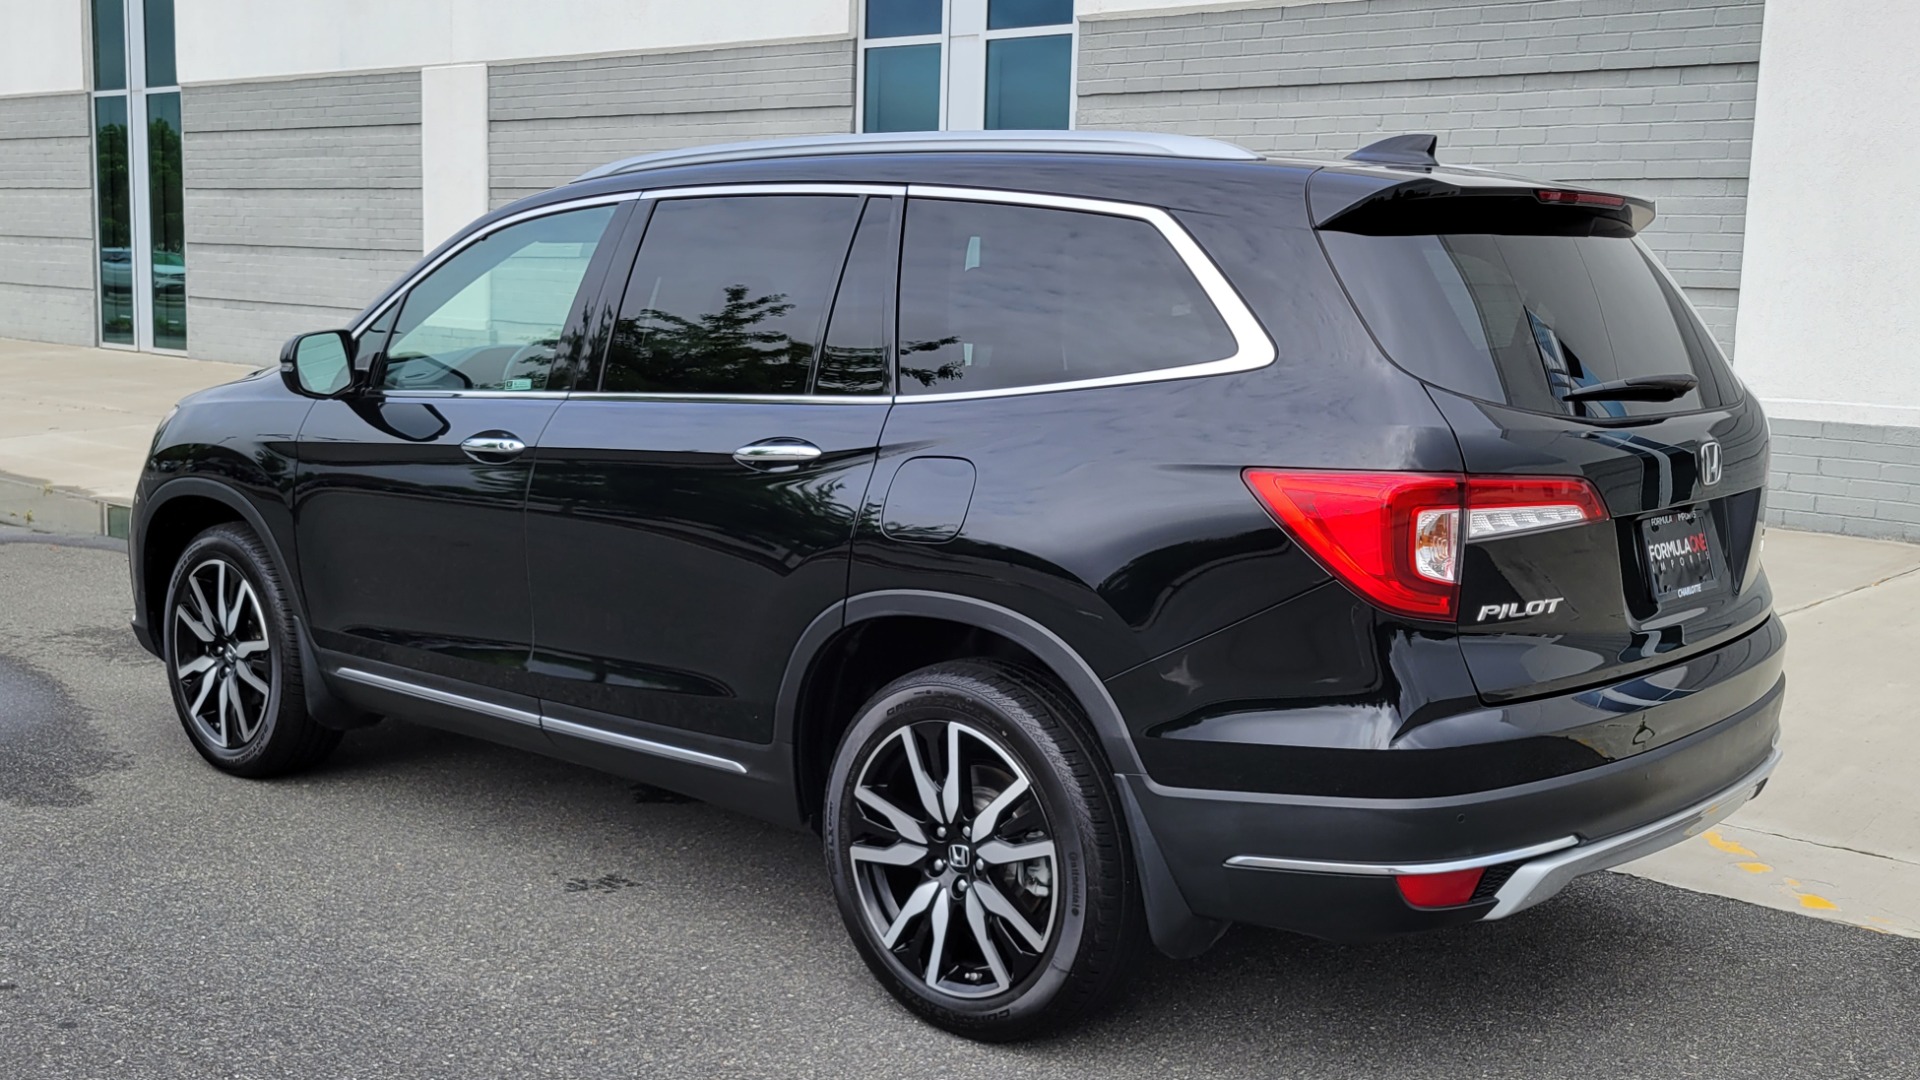 Used 2020 Honda PILOT TOURING 7-PASSENGER / NAV / SUNROOF / ENTERTAINMENT / 3-ROW for sale Sold at Formula Imports in Charlotte NC 28227 5